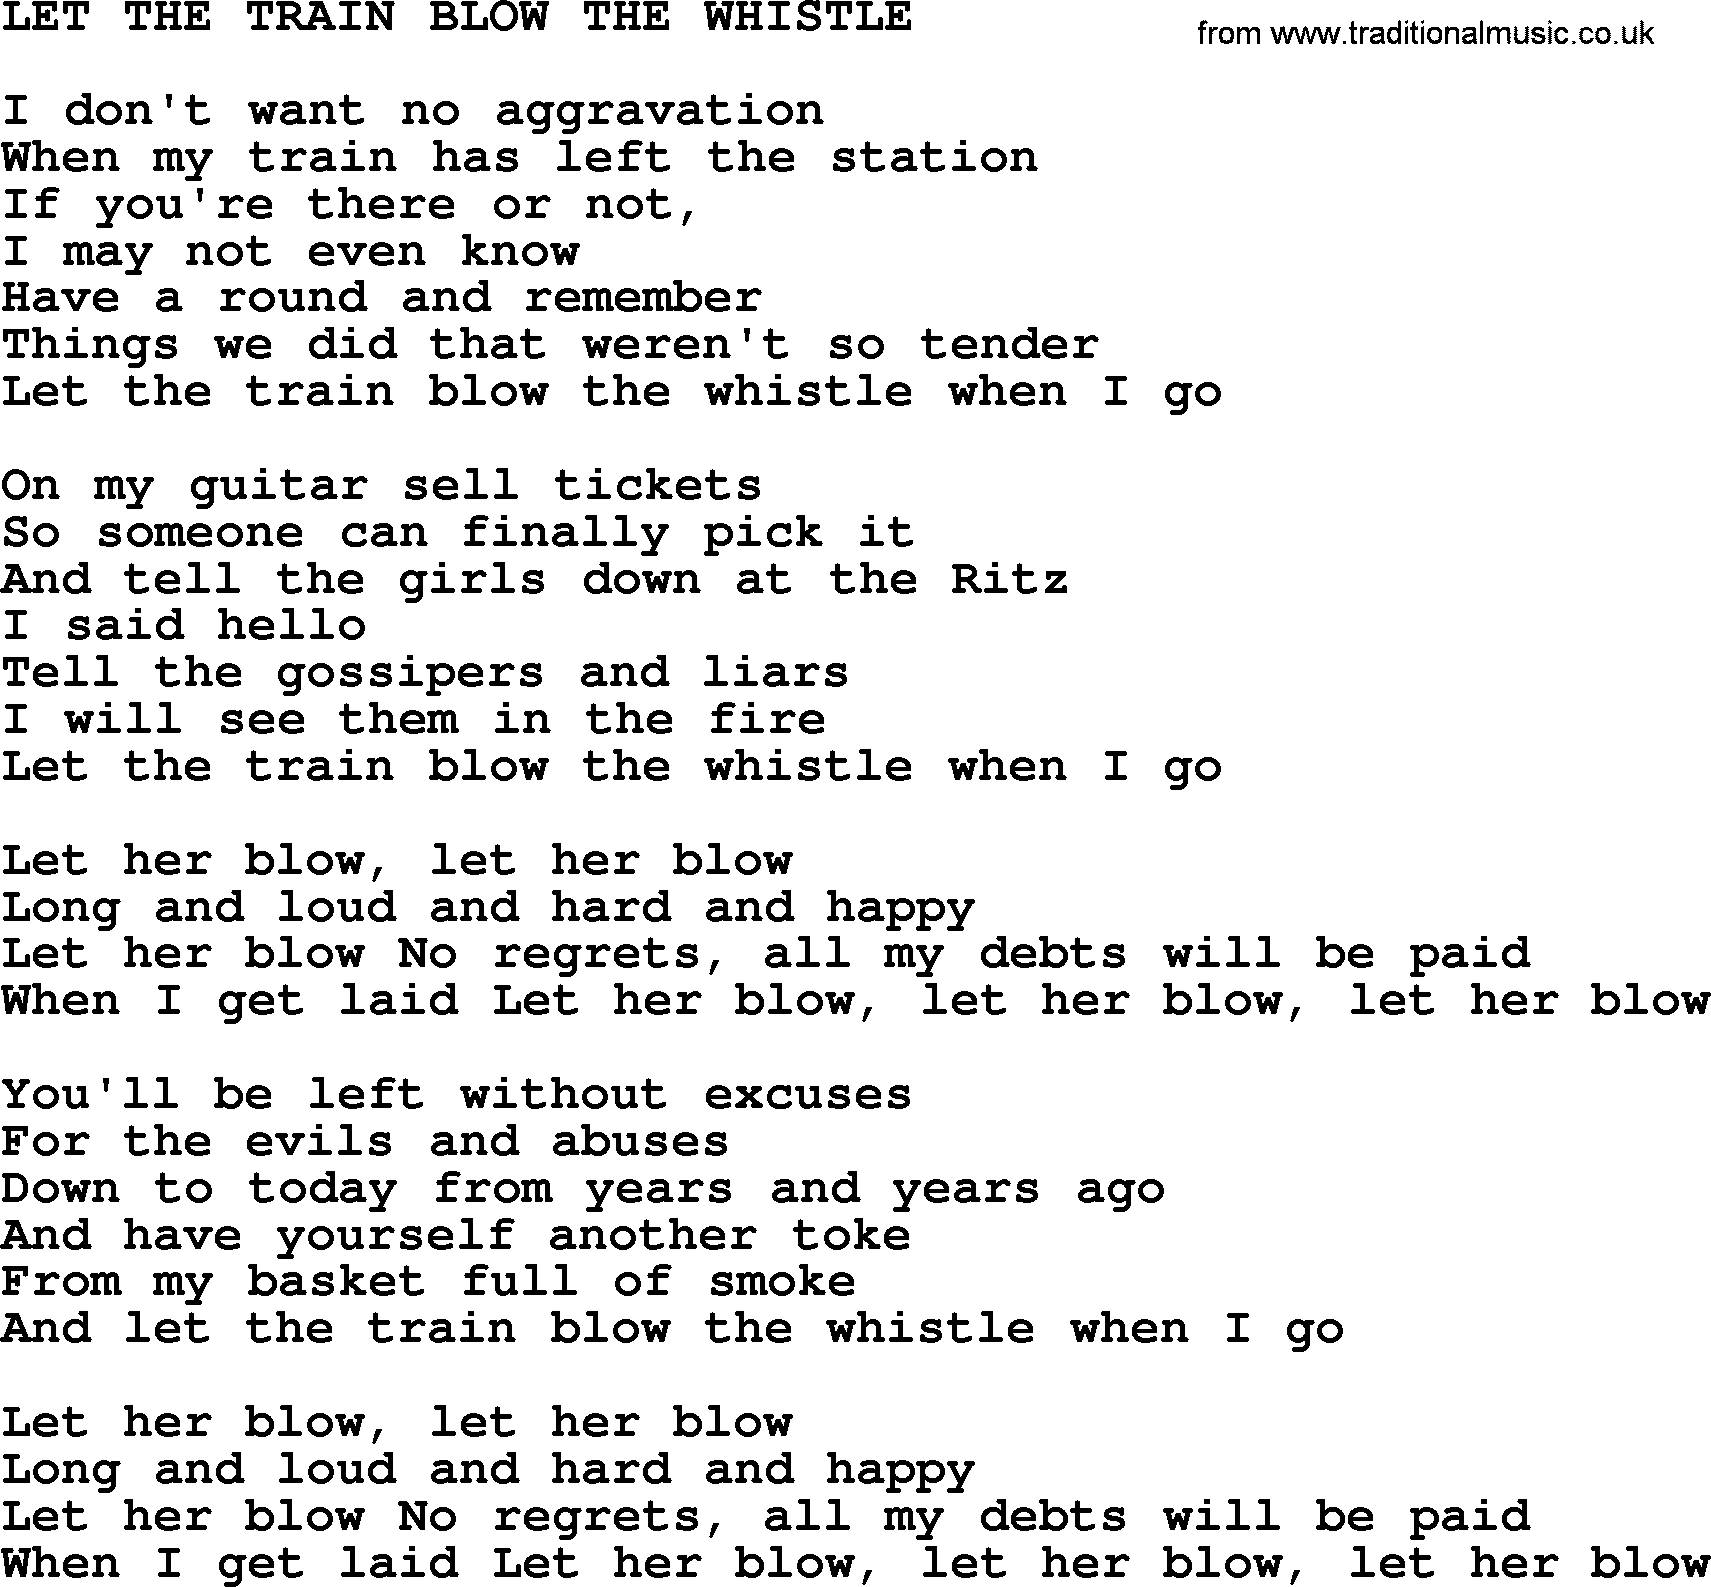 Johnny Cash song Let The Train Blow The Whistle.txt lyrics